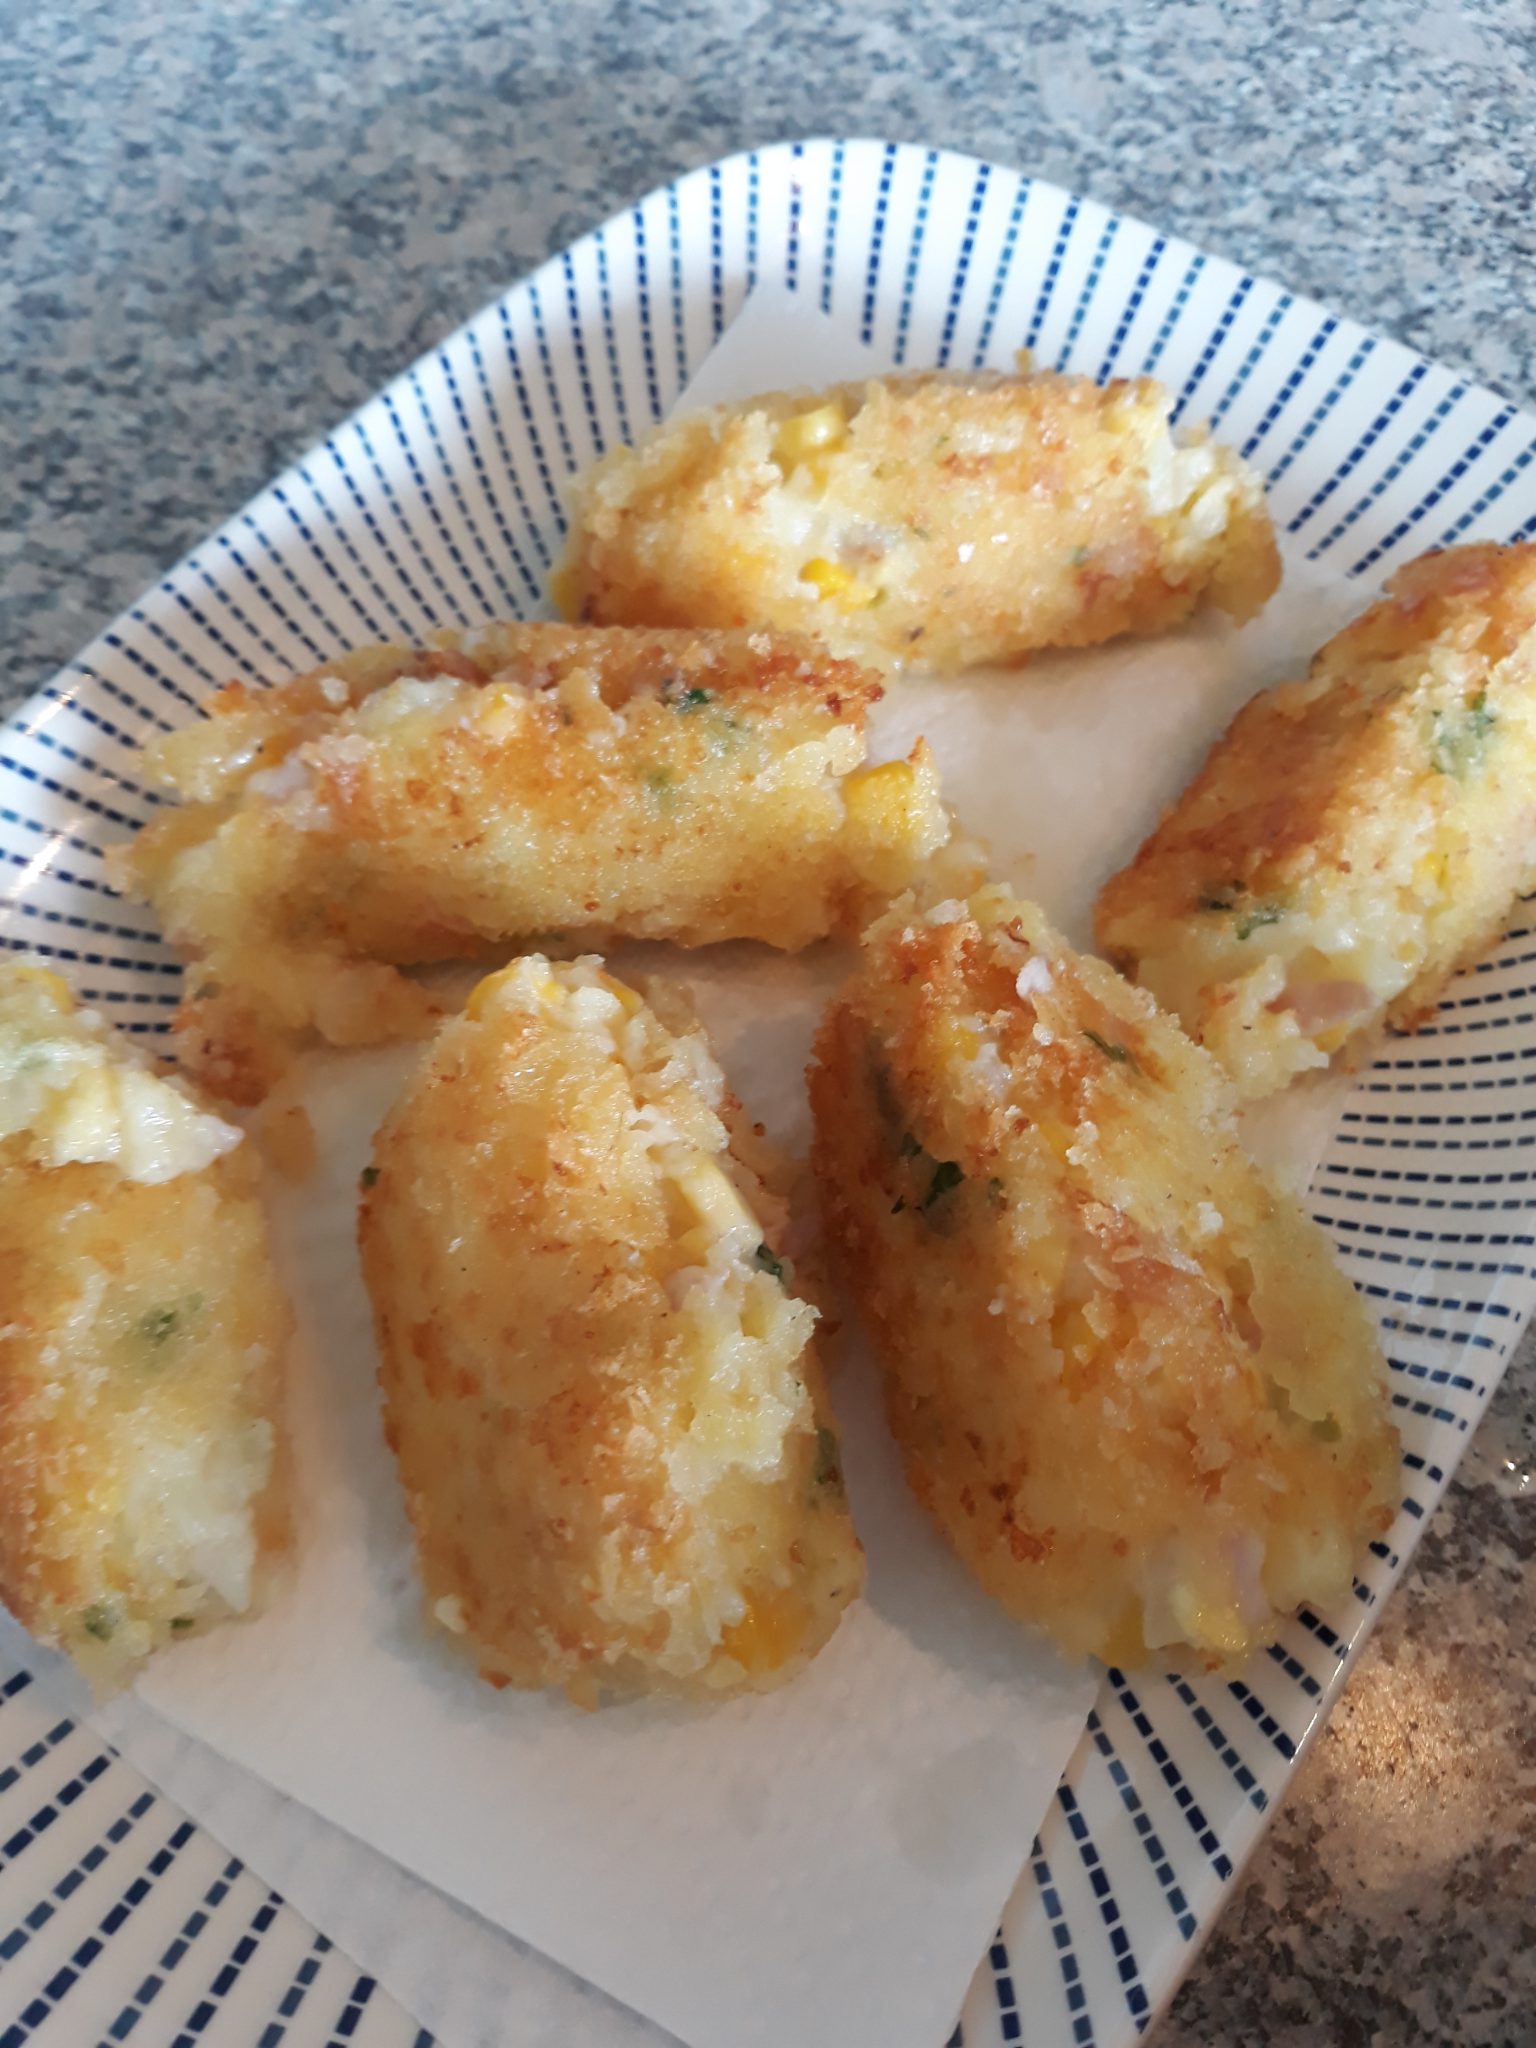 Sweetcorn and Ham Croquettes – By Hazel, Age 8